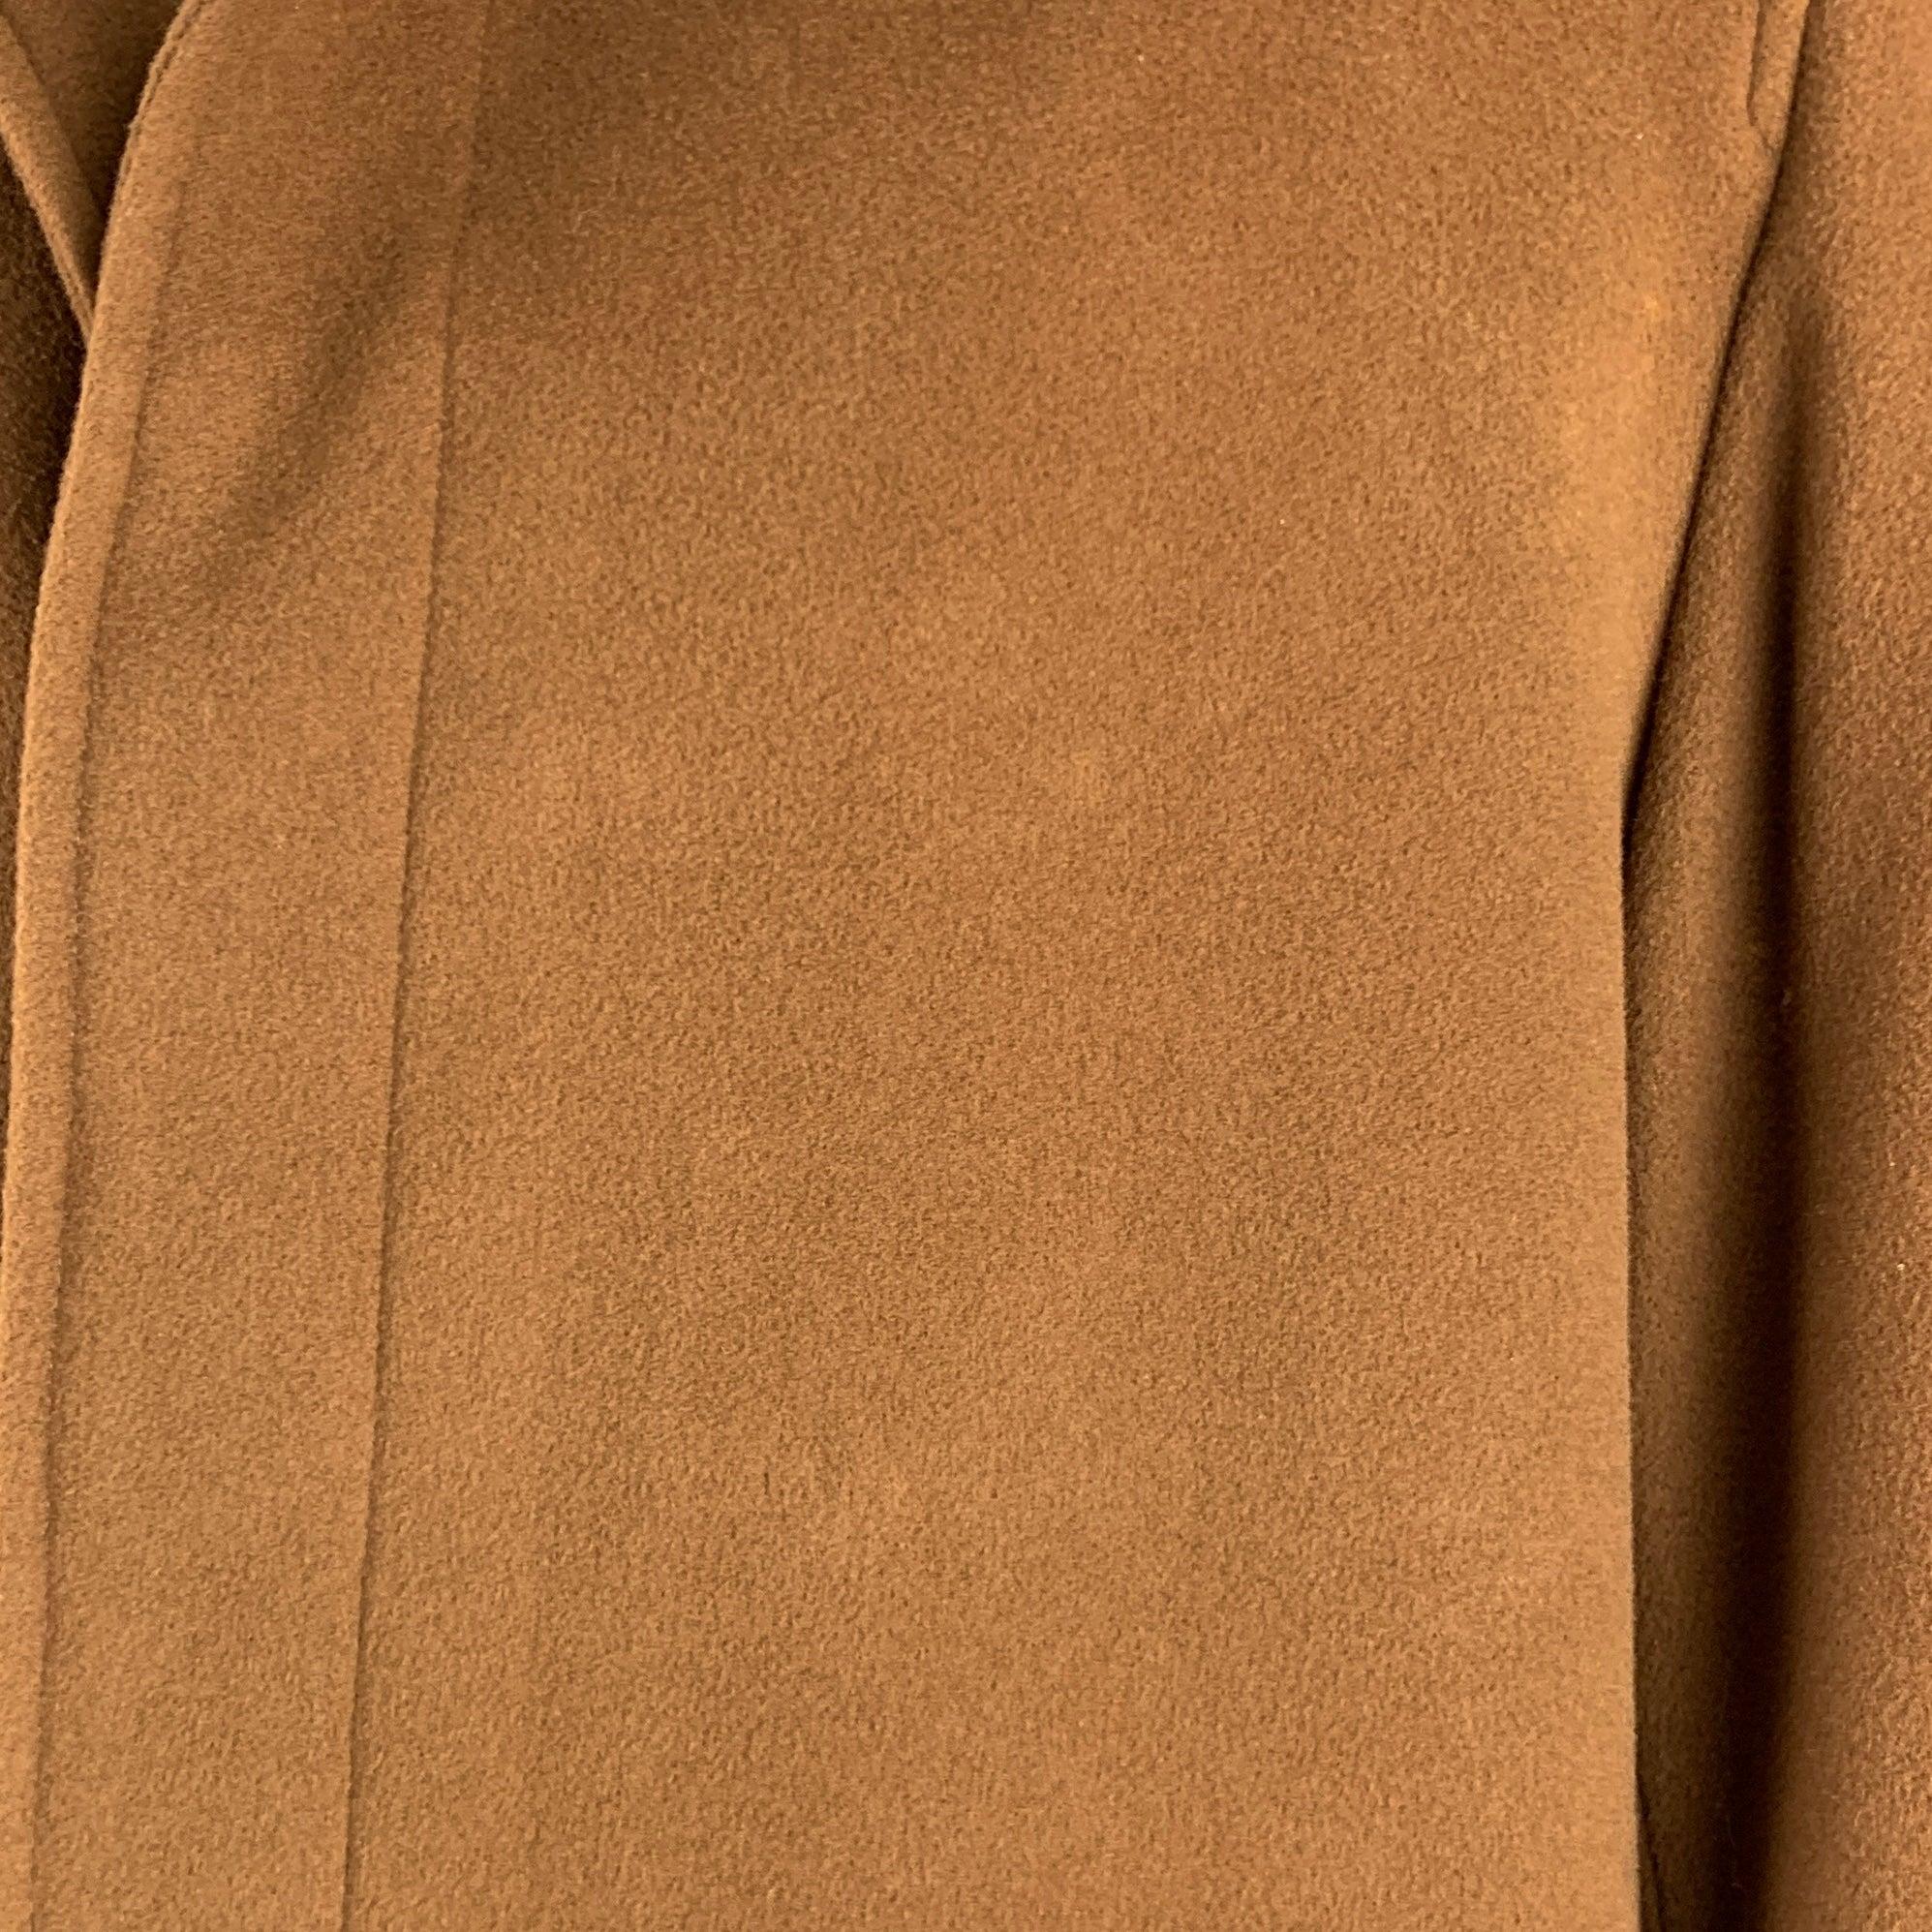 SAKS FIFTH AVENUE Size 48 Tan Wool Cashmere Coat For Sale 1